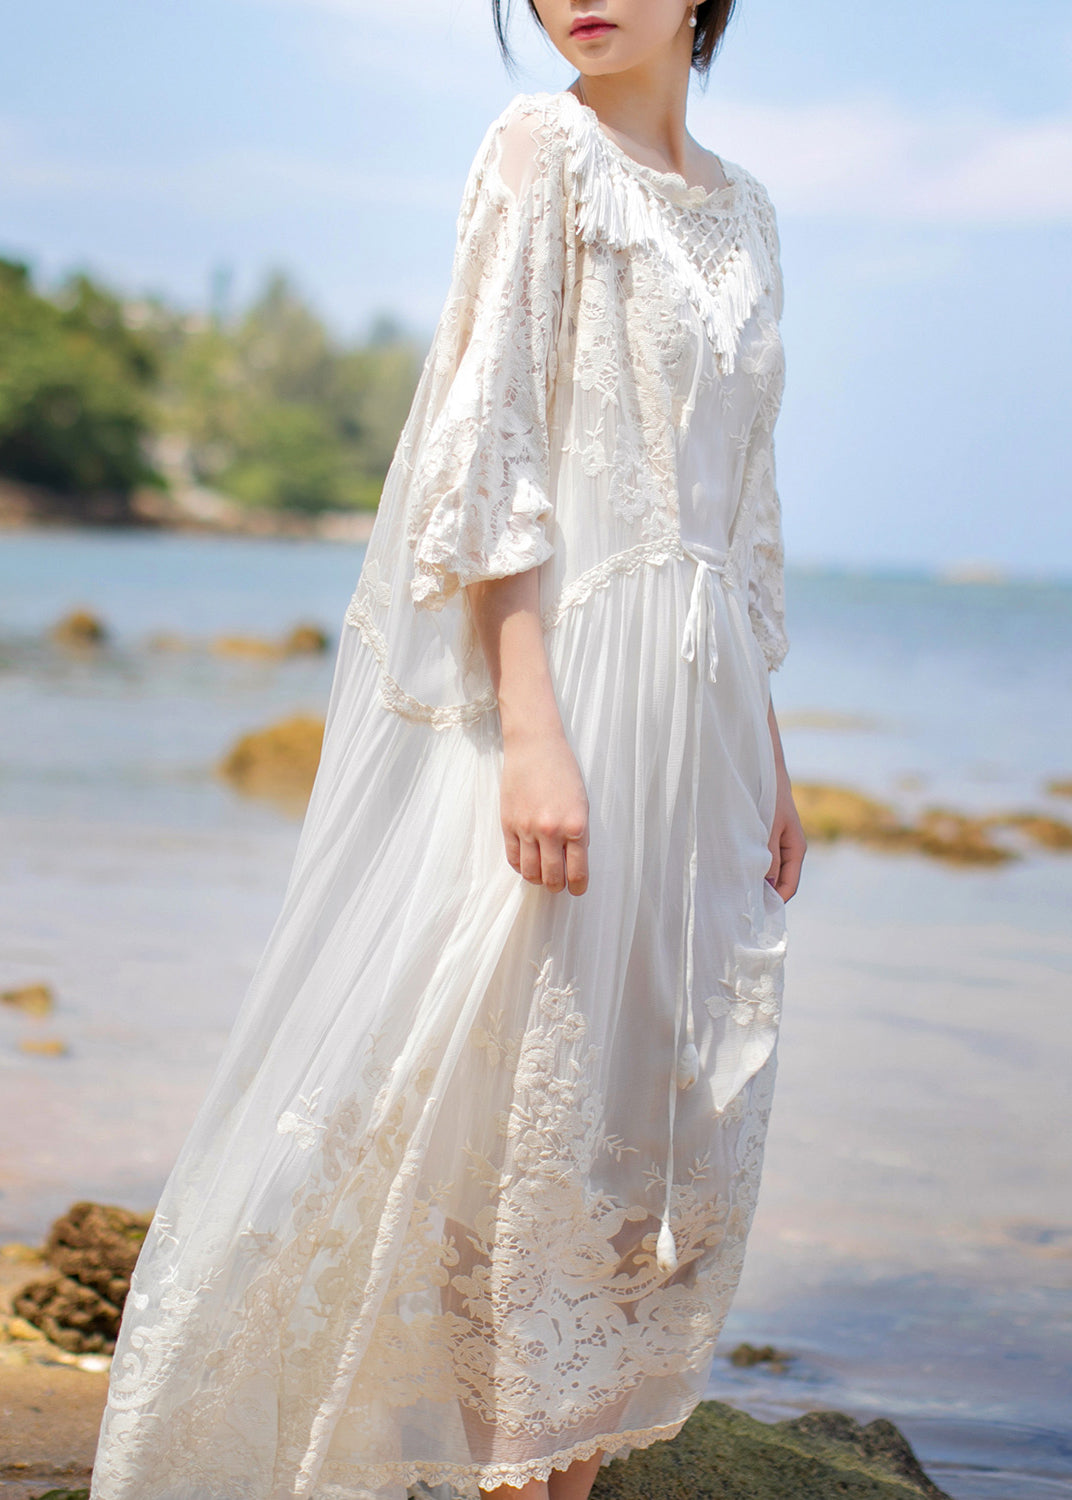 Organic Beige O-Neck Embroideried Floral Lace Tassel Silk Long Dress Long Sleeve